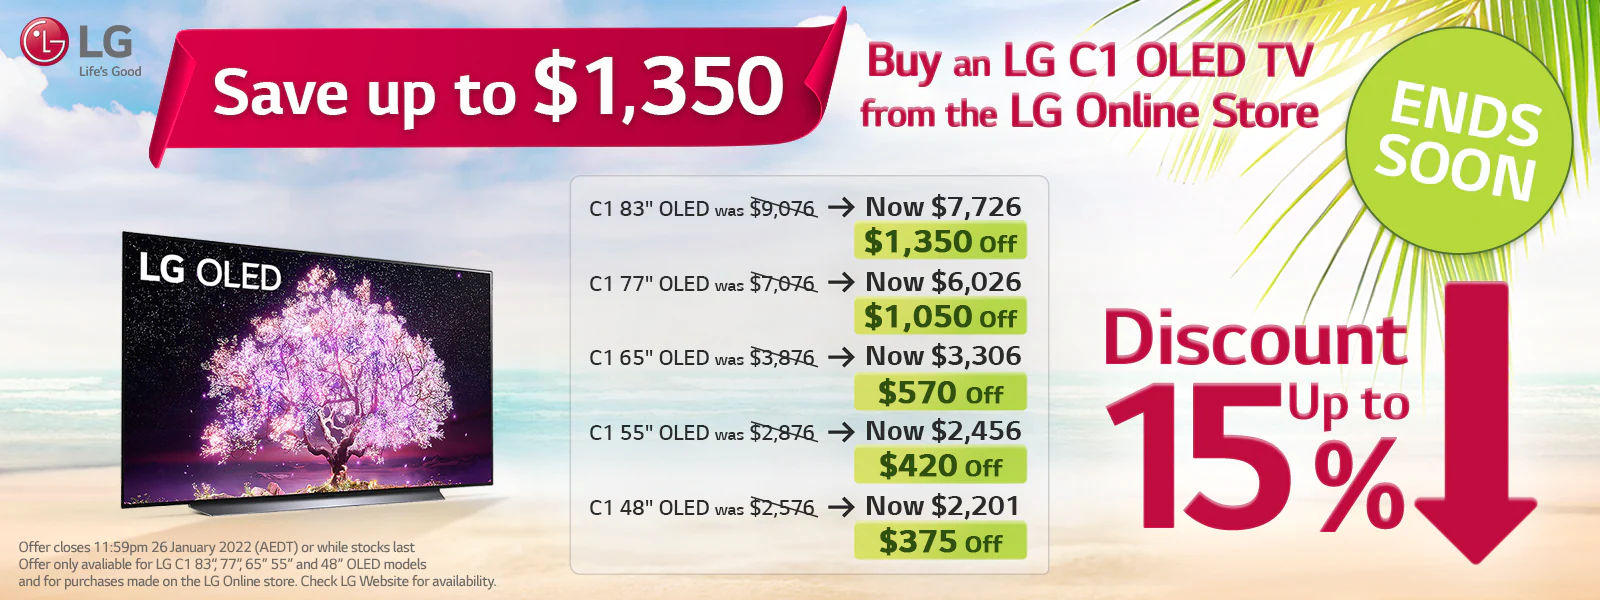 LG up to 15% OFF on LG C1 83", 77", 65", 55", 48" inch OLED models